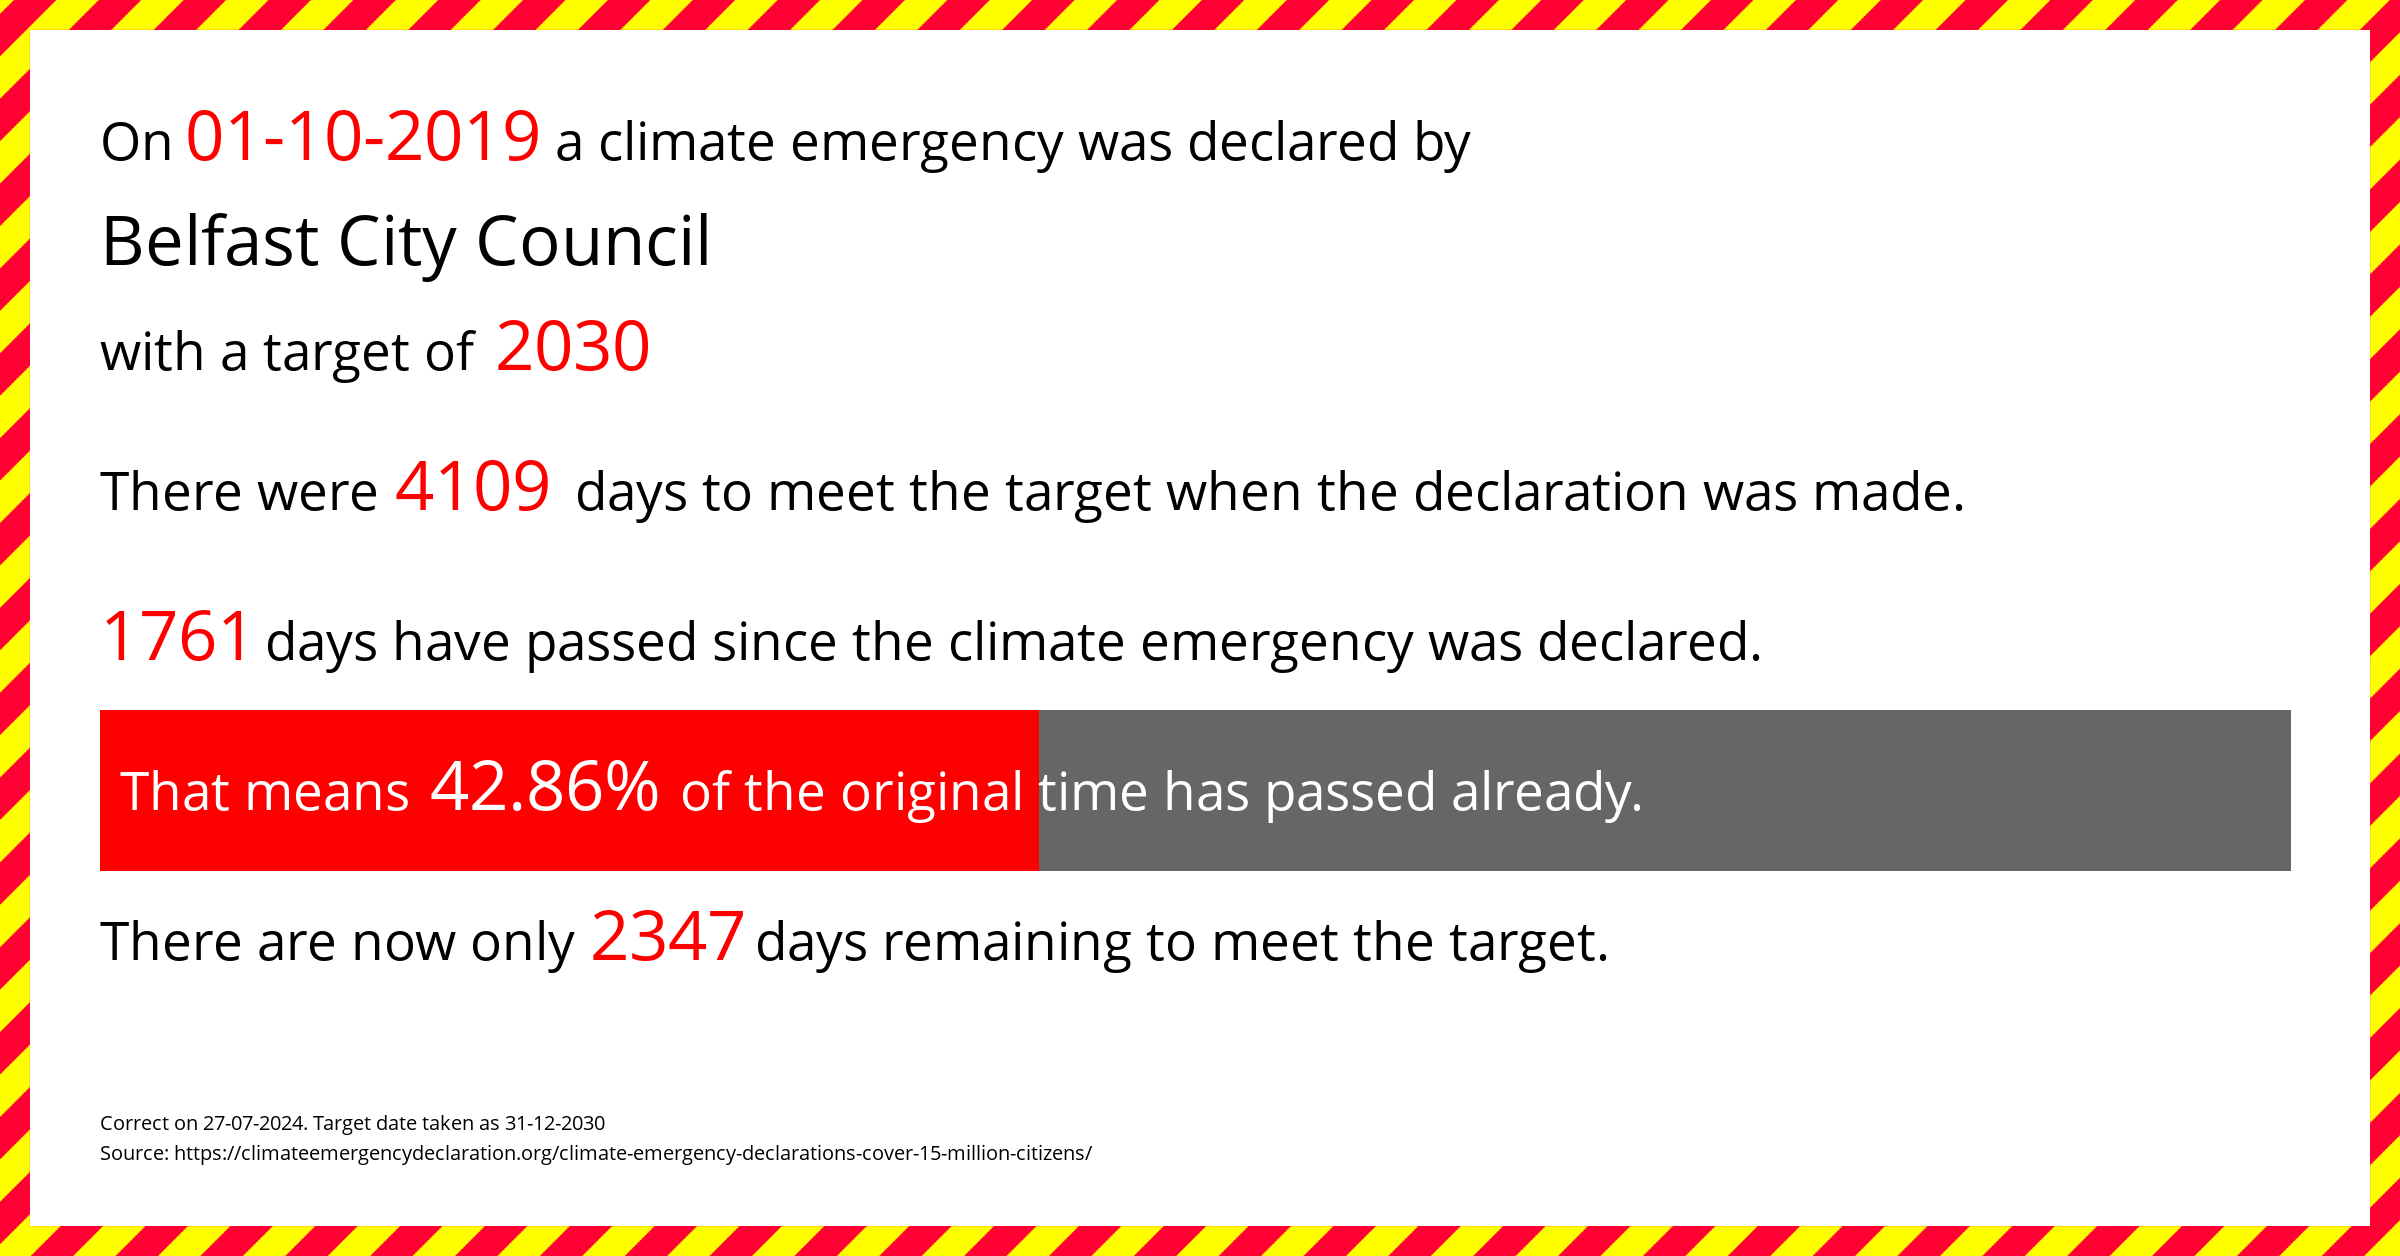 Belfast City Council declared a Climate emergency on Tuesday 1st October 2019, with a target of 2030.